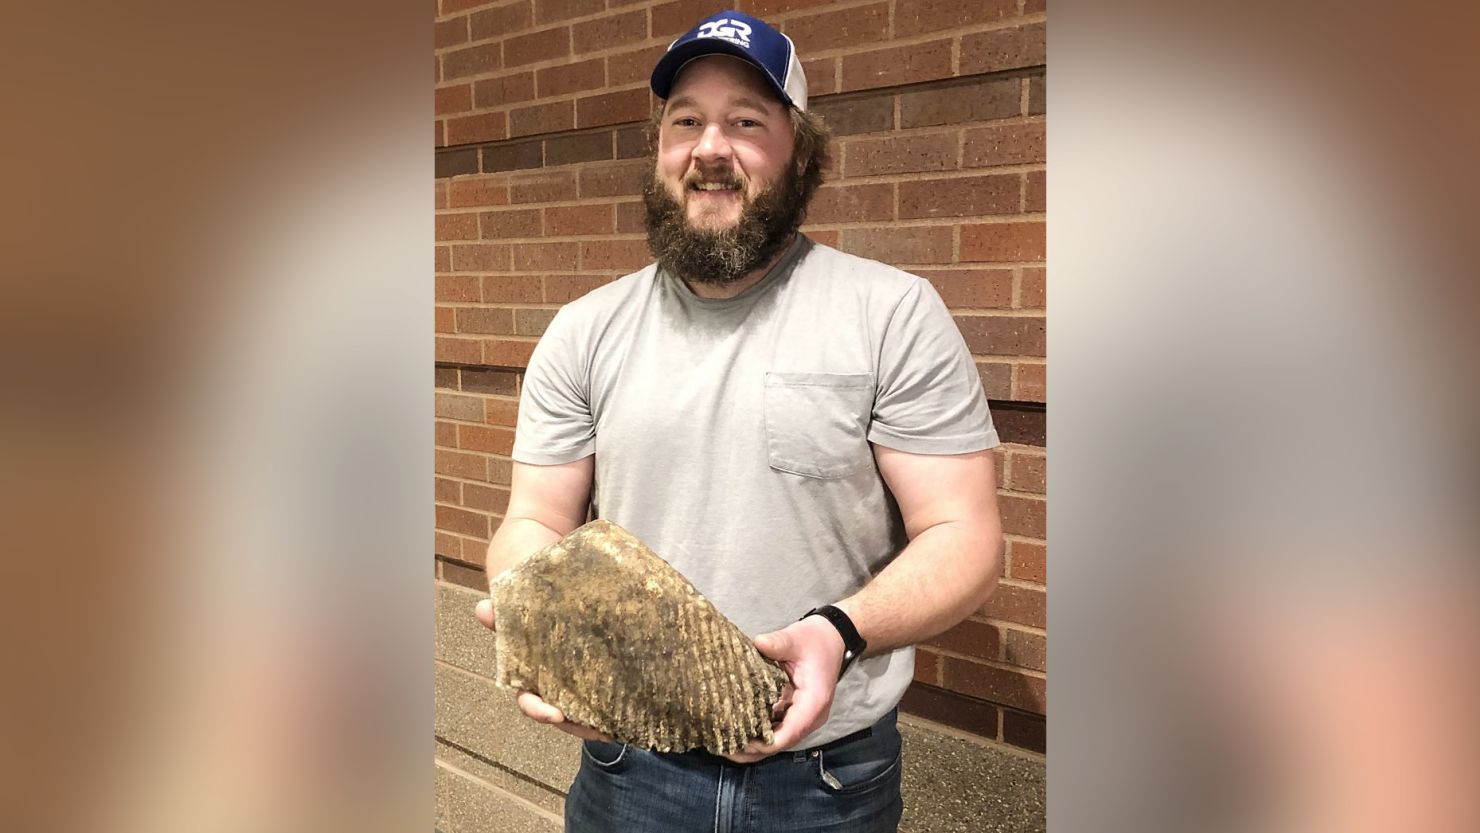 Justin Blauwet, a construction worker, discovered the 11-pound wooly mammoth tooth while observing a construction site in Sheldon, Iowa. 